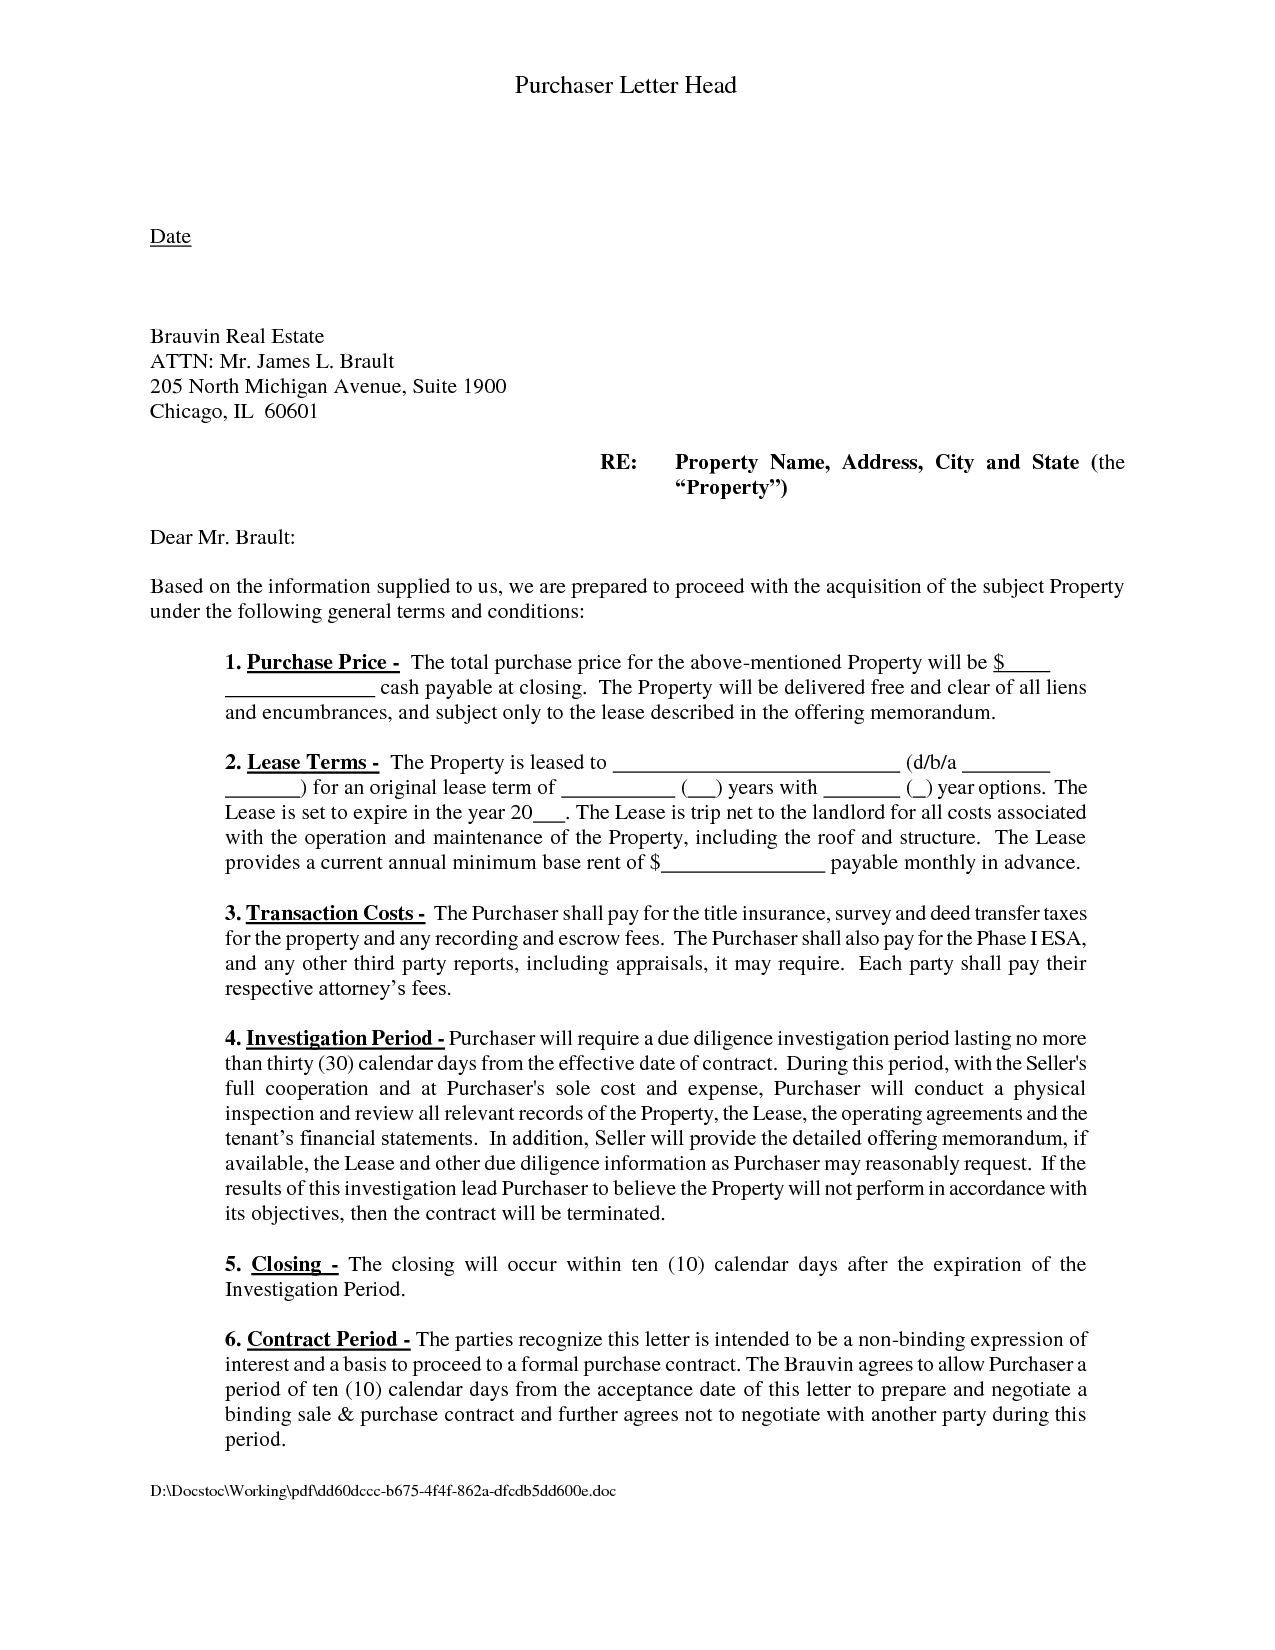 Letter Of Intent to Lease Template Free - Mercial Letter Intent Template to Lease Space Real Estate